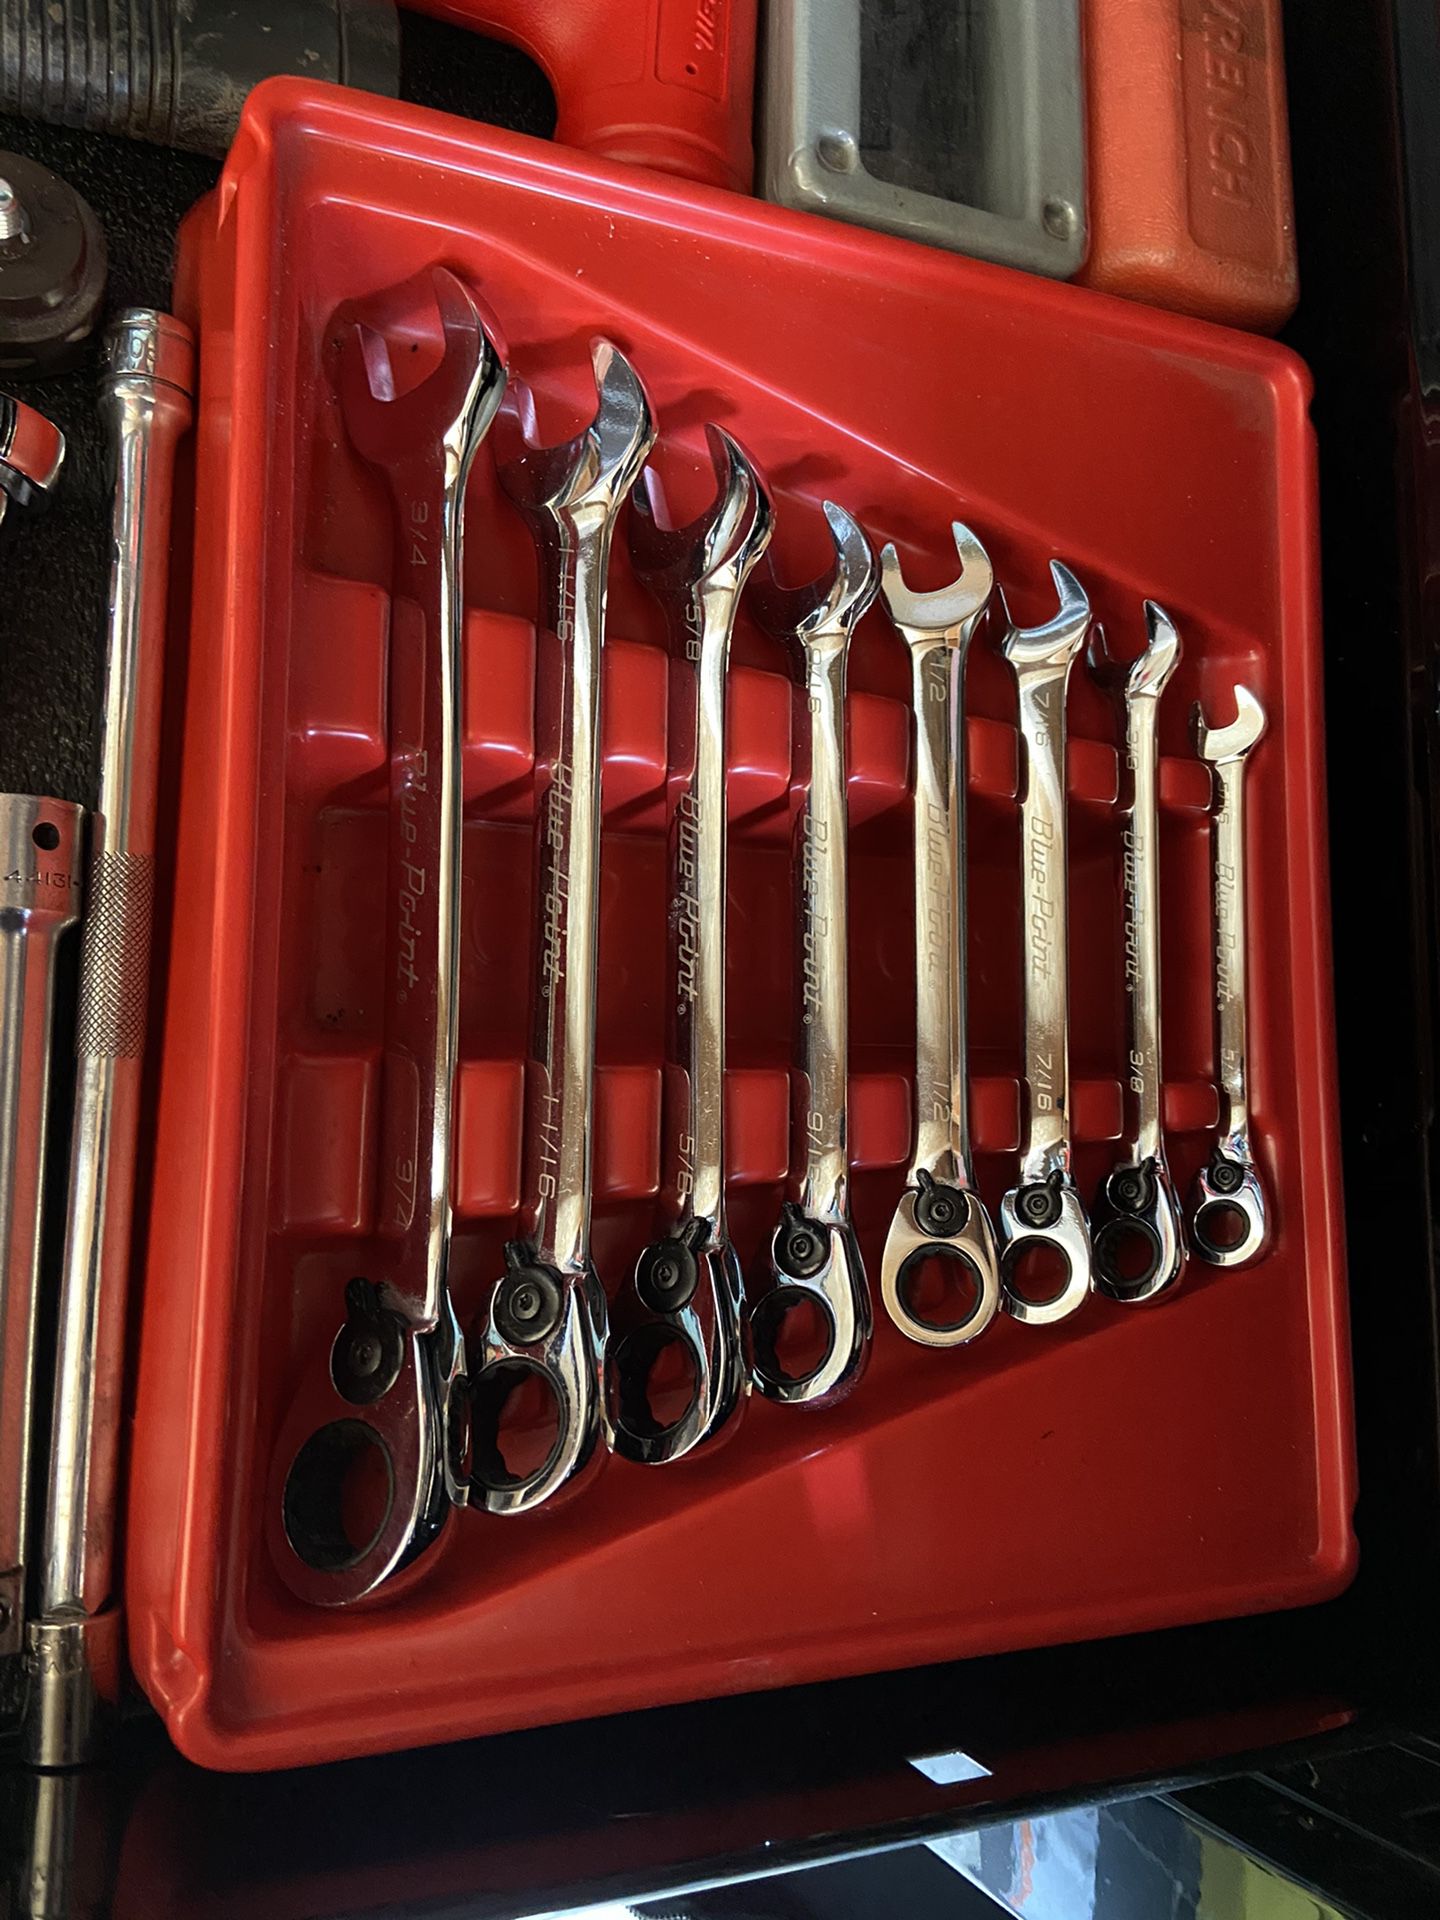 Snap on blue point 8 pc. SAE Set of ratching wrenches